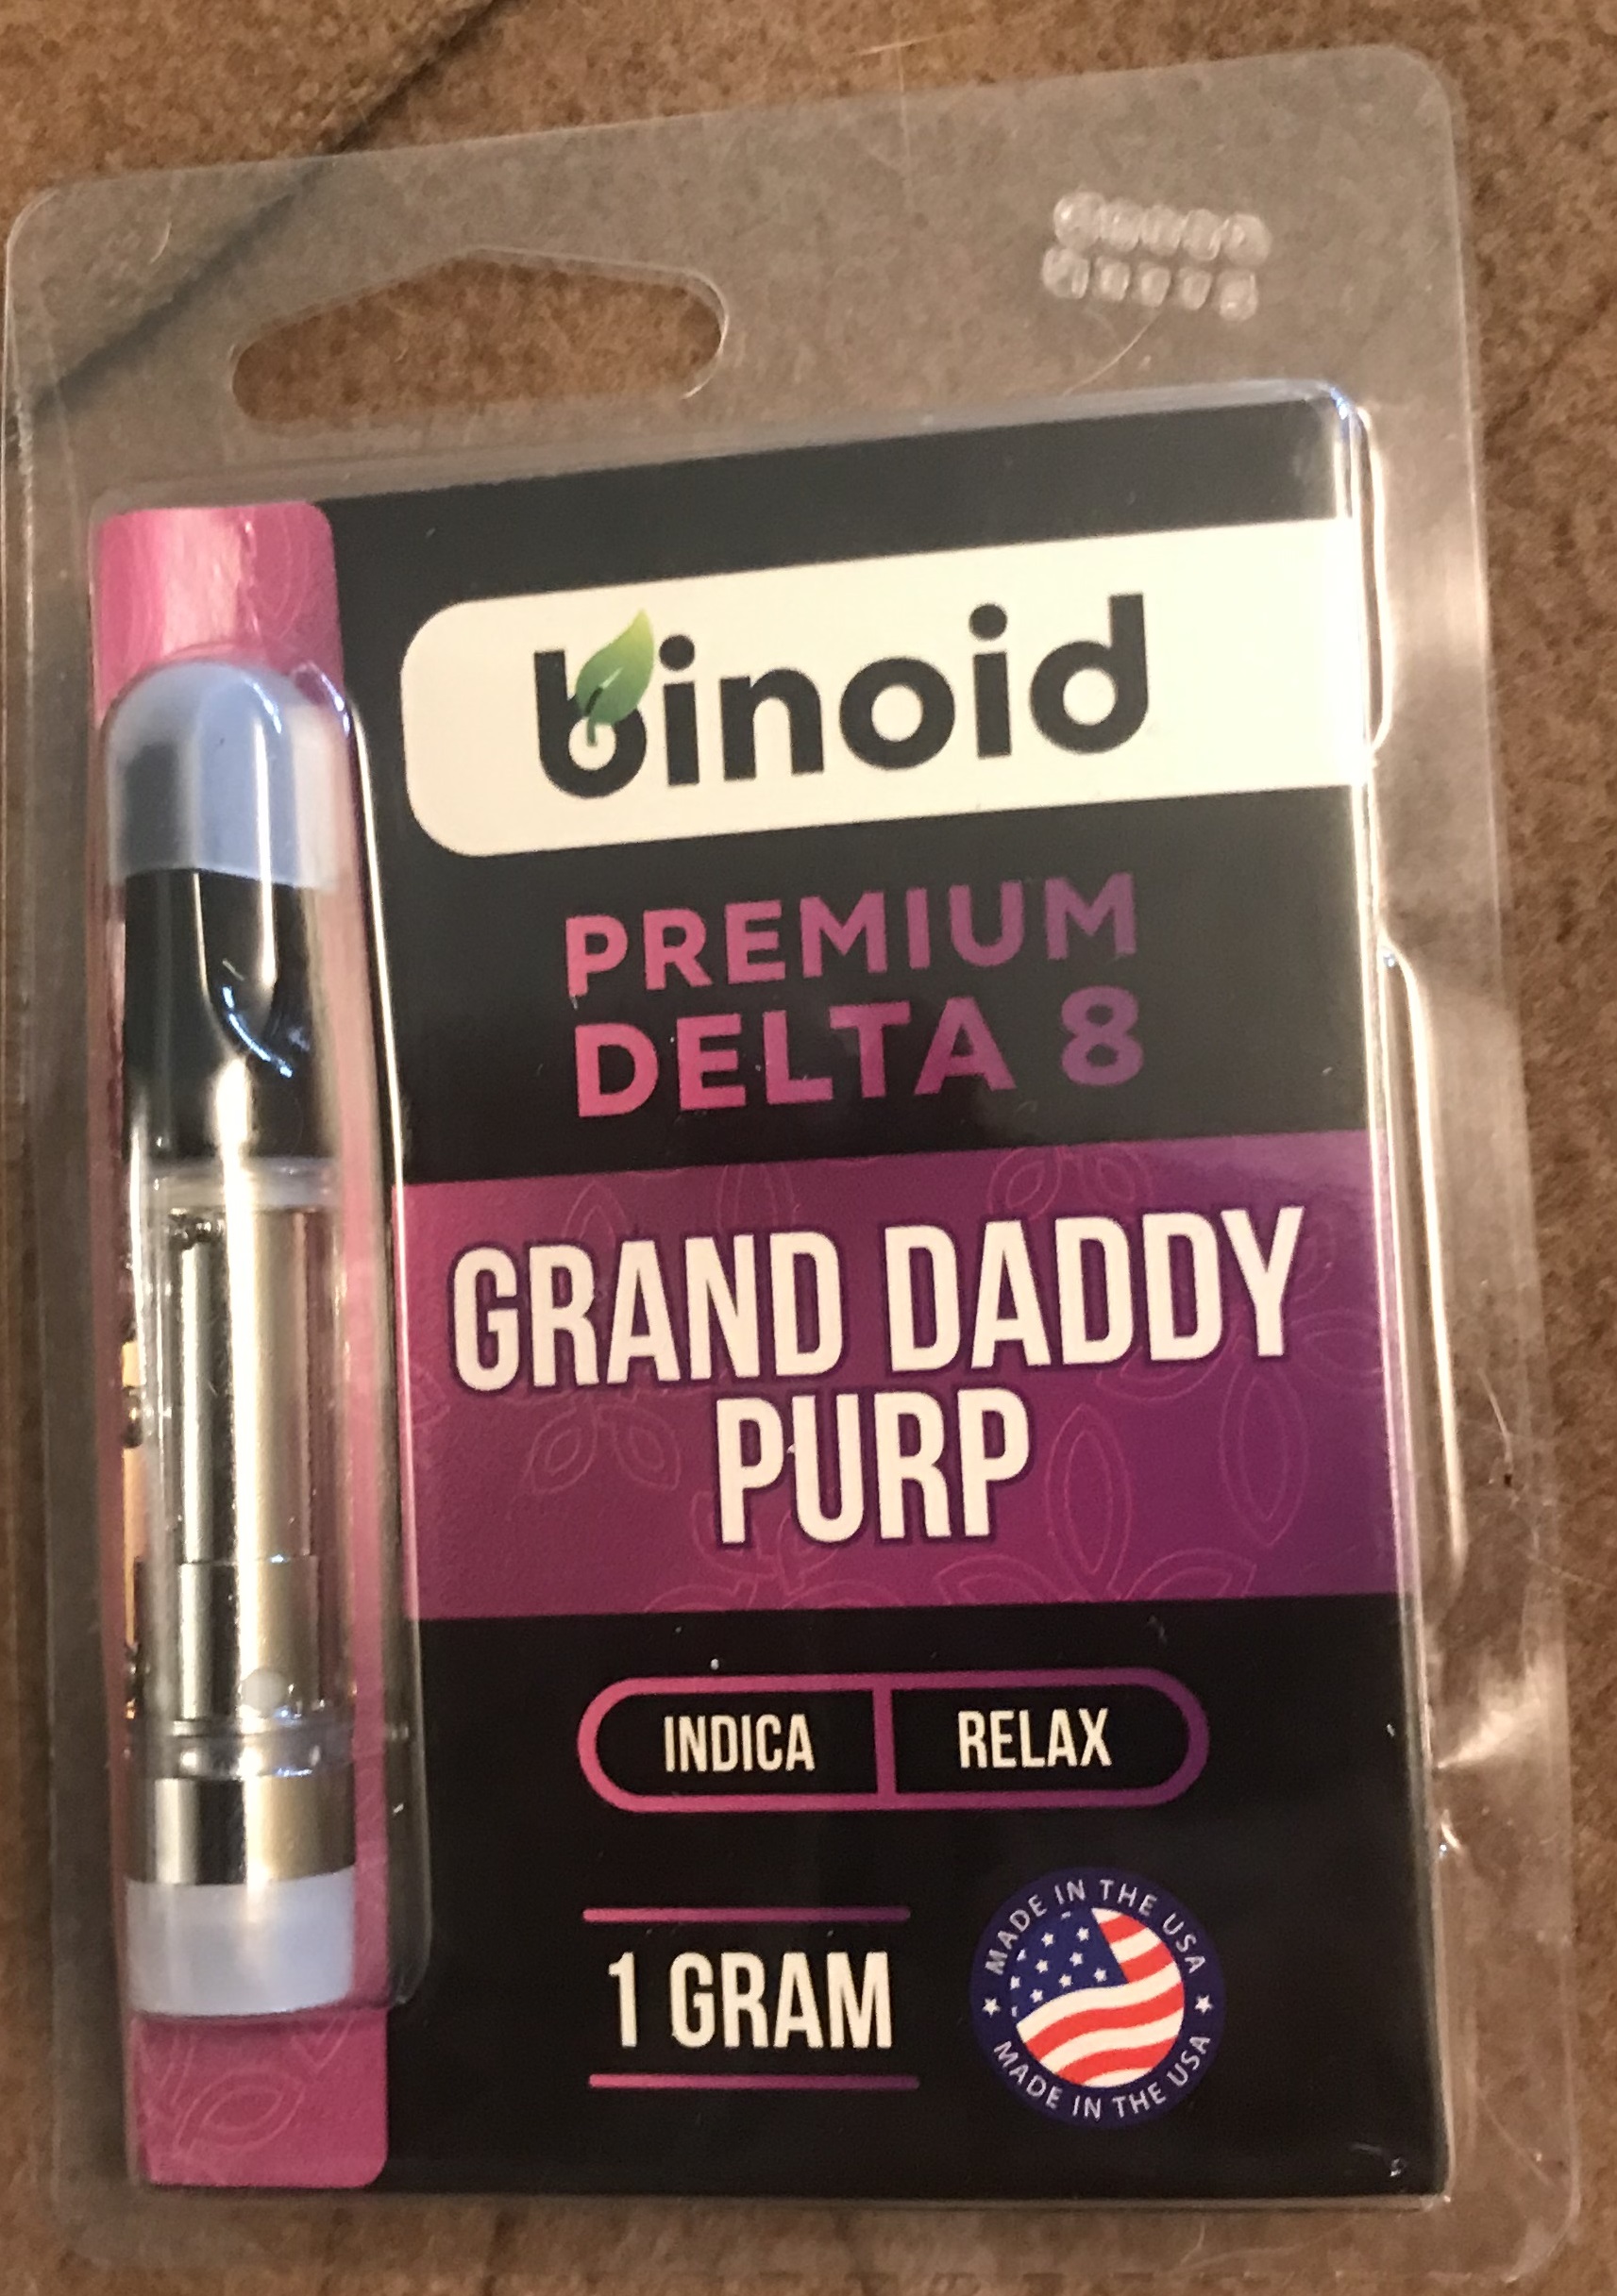 Delta-8 Legal States - Products|Thc|Hemp|Brand|Gummies|Product|Delta-8|Cbd|Origin|Cannabis|Delta|Users|Effects|Cartridges|Brands|Range|List|Research|Usasource|Options|Benefits|Plant|Companies|Vape|Source|Results|Gummy|People|Space|High-Quality|Quality|Place|Overview|Flowers|Lab|Drug|Cannabinoids|Tinctures|Overviewproducts|Cartridge|Delta-8 Thc|Delta-8 Products|Delta-9 Thc|Delta-8 Brands|Usa Source|Delta-8 Thc Products|Cannabis Plant|Federal Level|United States|Delta-8 Gummies|Delta-8 Space|Health Canada|Delta Products|Delta-8 Thc Gummies|Delta-8 Companies|Vape Cartridges|Similar Benefits|Hemp Doctor|Brand Overviewproducts|Drug Test|High-Quality Products|Organic Hemp|San Jose|Editorial Team|Farm Bill|Overview Products|Wide Range|Psychoactive Properties|Reliable Provider|Boston Hempire